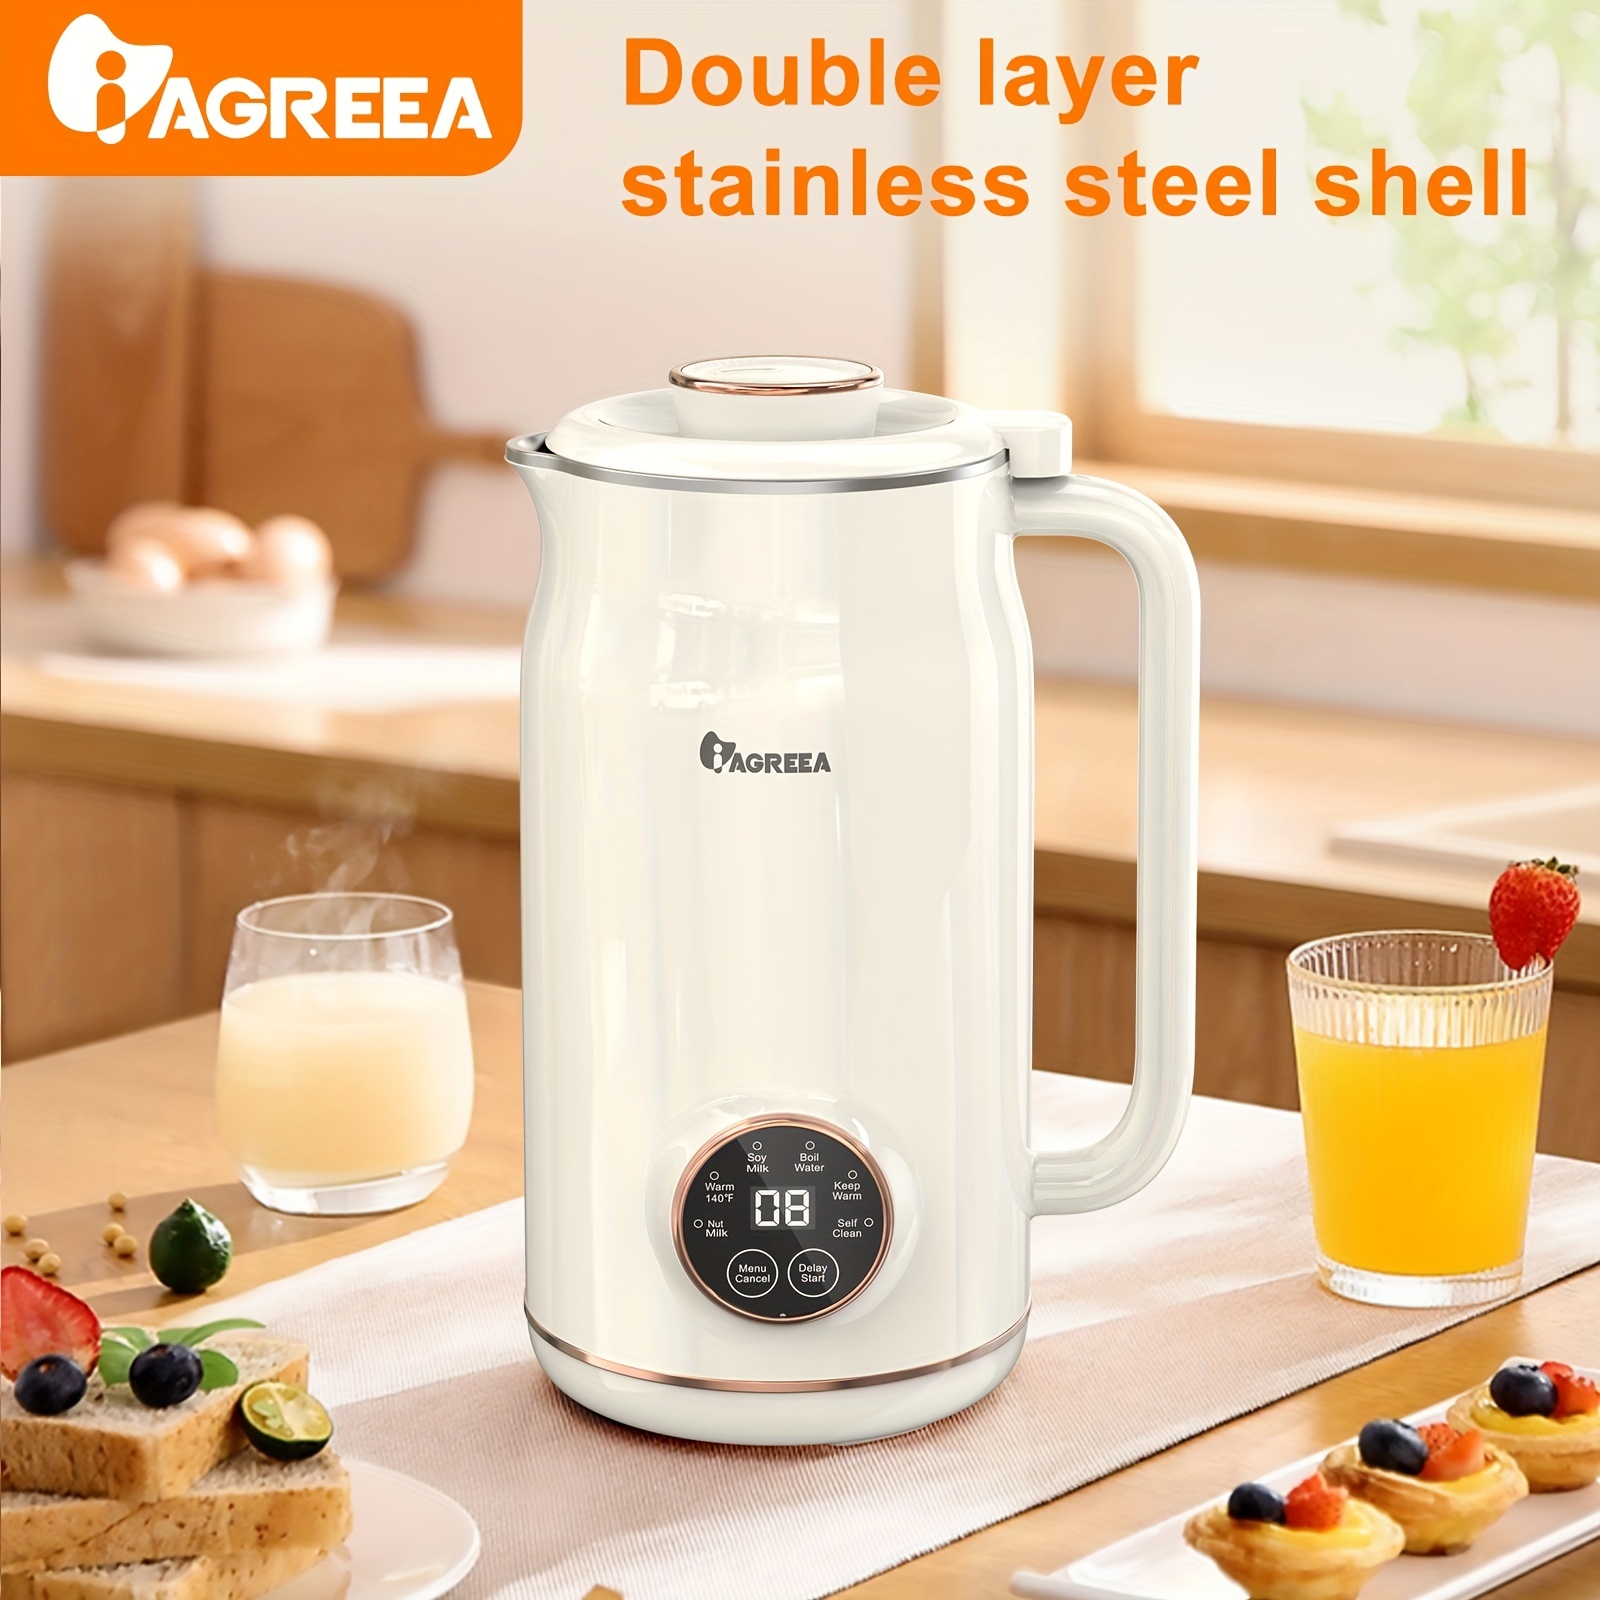 Iagreea Soybean Milk Machine, Stainless Steel, Wall Breaking Machine, Nut Milk  Machine, Portable Juicer, Boiling Free Automatic Juicer, Temperature  Control, Intelligent Touch Control Milk Heater, One Button Cleaning,  Suitable For Oats, Soybeans